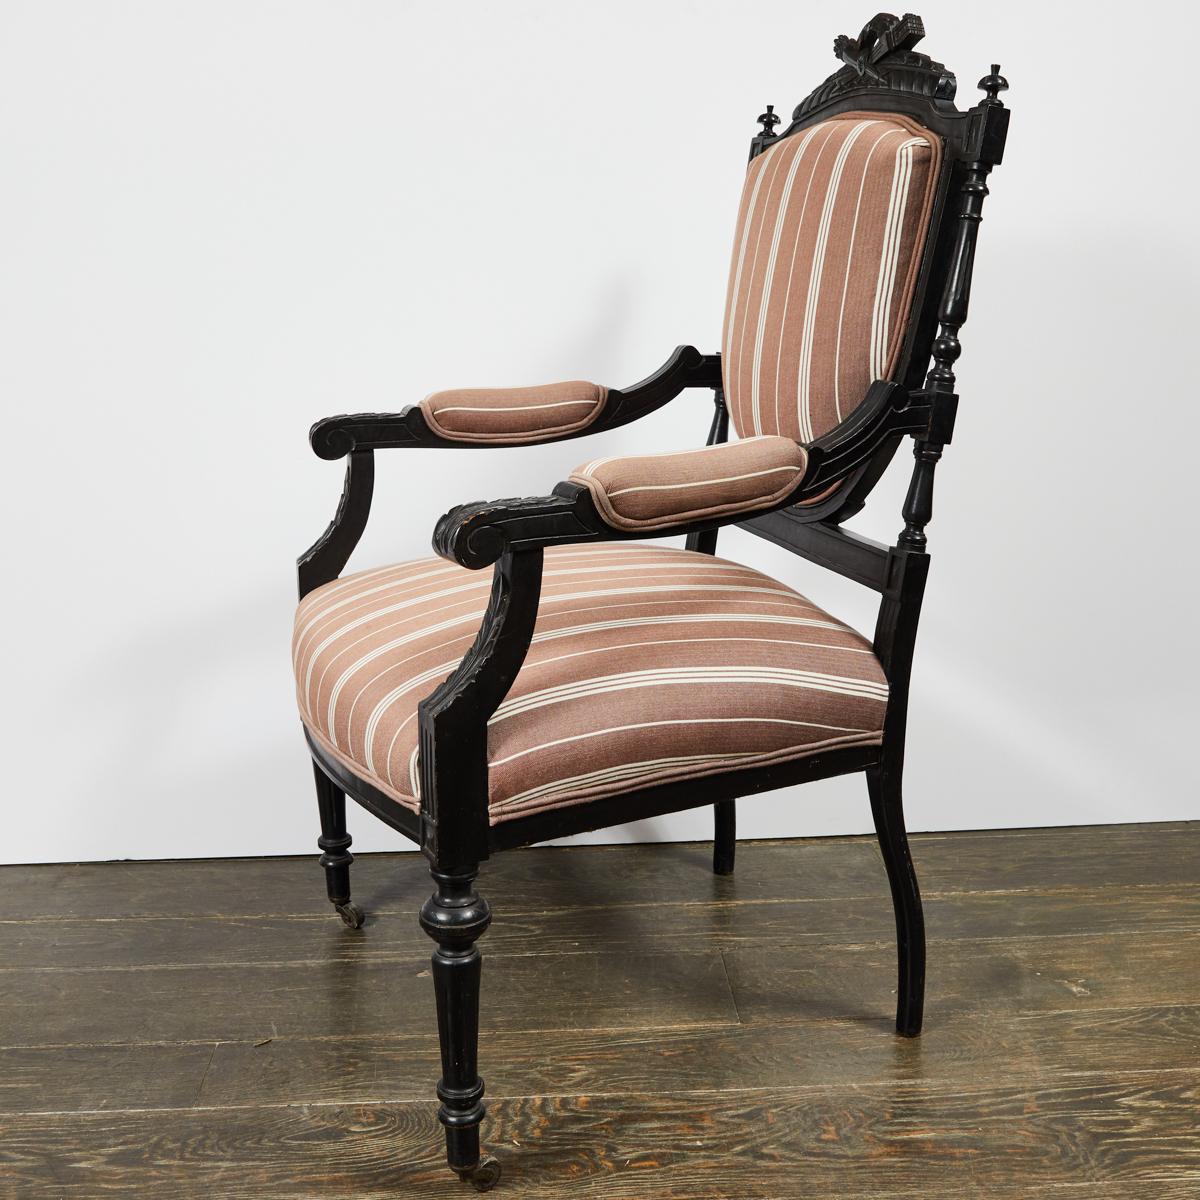 1870s Louis XVI style carved and ebonized fauteuil open armchair upholstered in custom taupe and cream striped linen. Mounted on casters, this armchair features beautifully carved neoclassical details.

France, circa 1870

Dimensions: 25W x 26D x 44H